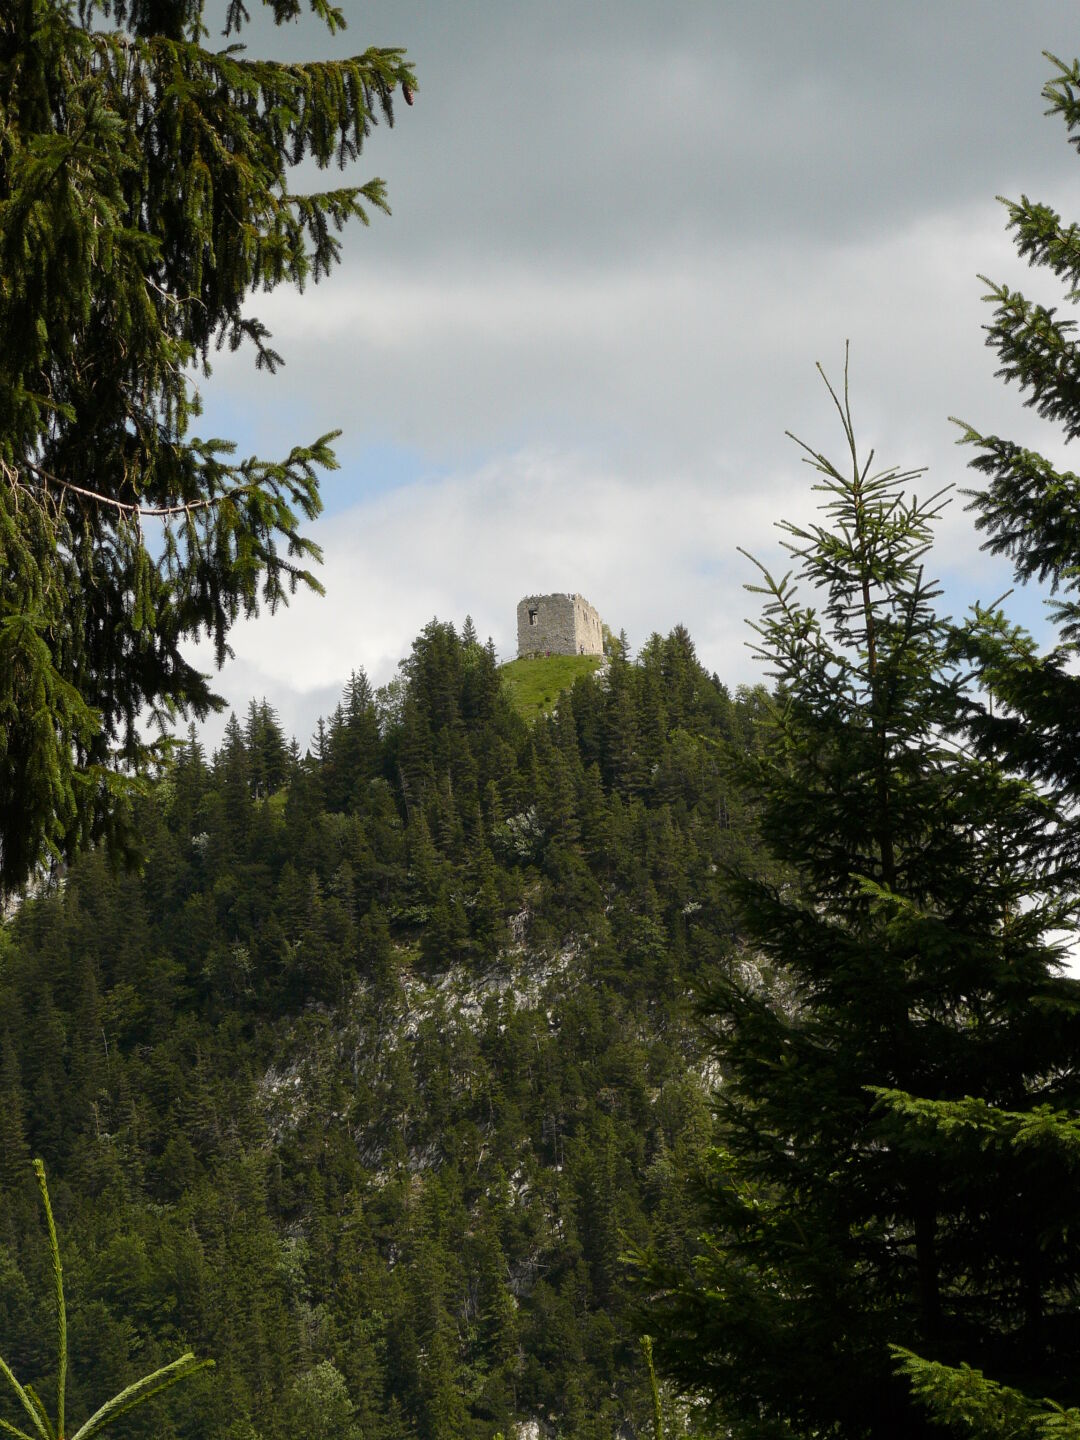 The ruins of castle Falkenstein. Thankfully (for the finances of the Bavarian State), King Ludwig II died before he could spend more money he didn&rsquo;t have on the construction of a castle even bigger and fancier than Neuschwanstein in this place.